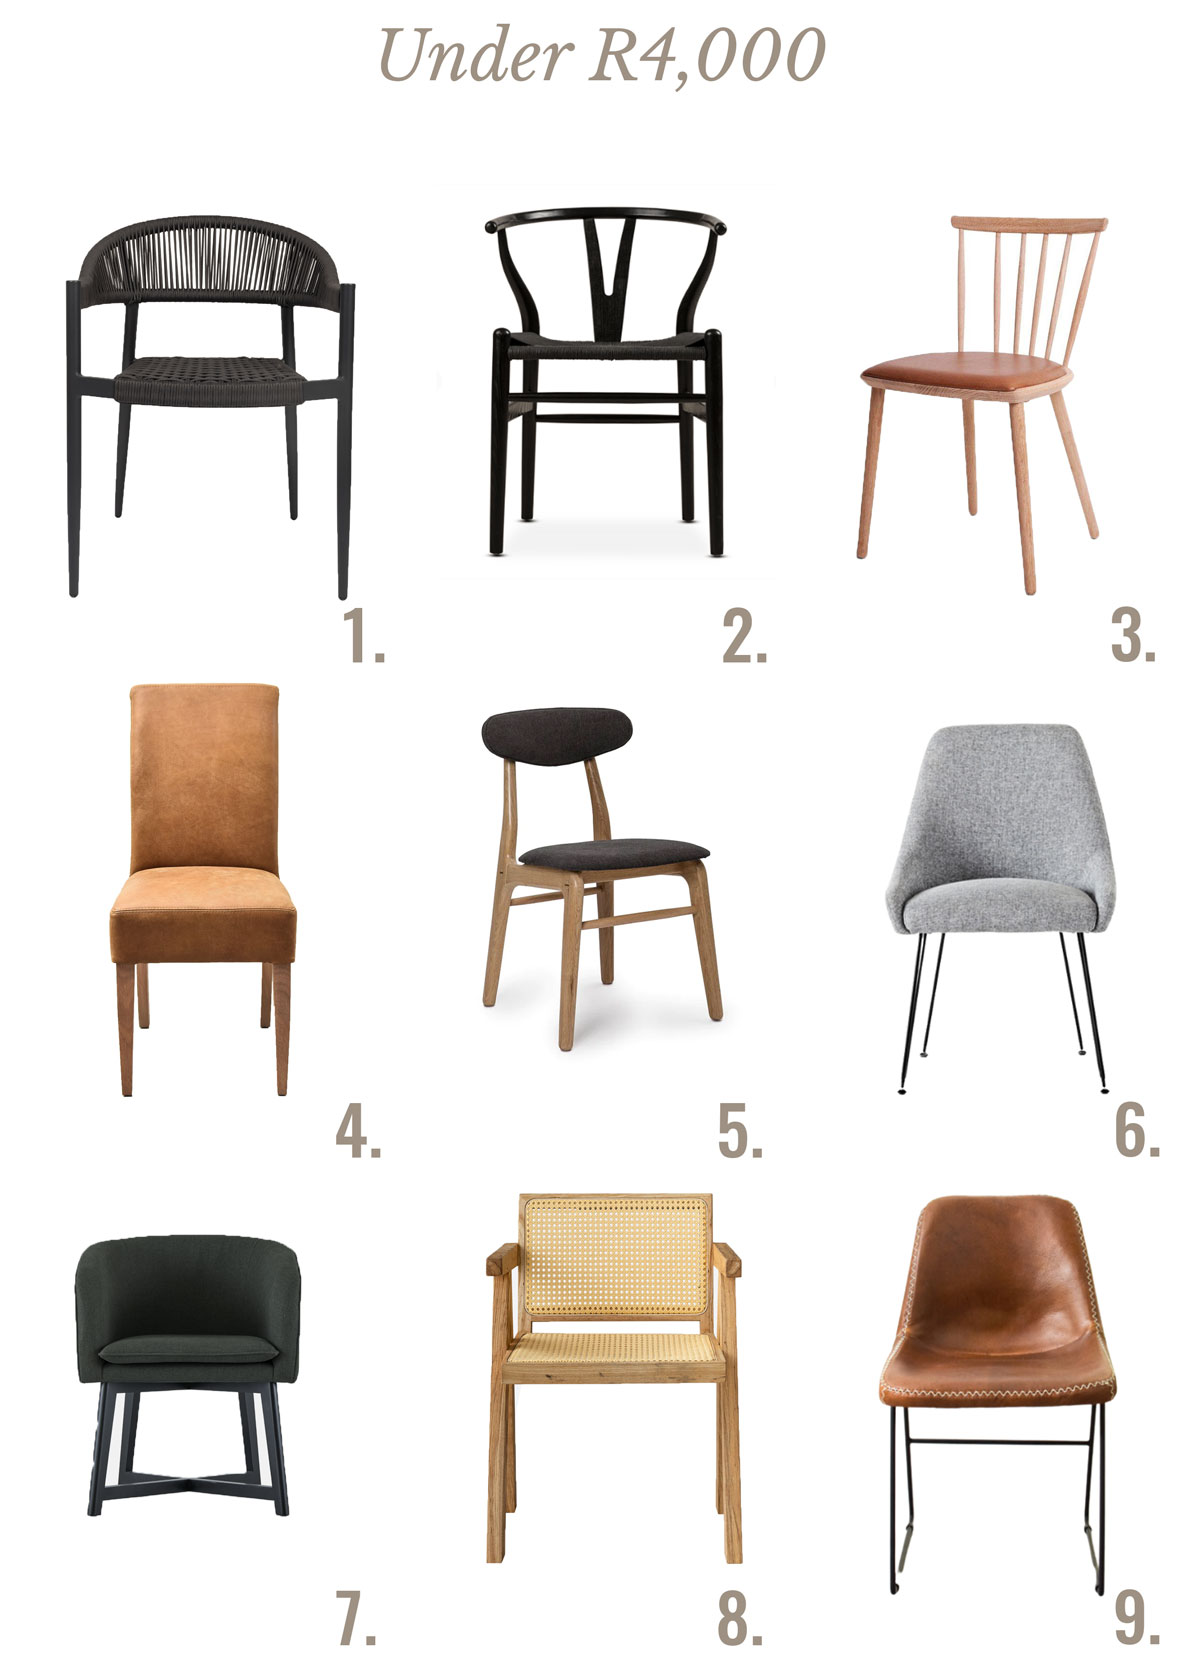 Dining Chairs Under R4000